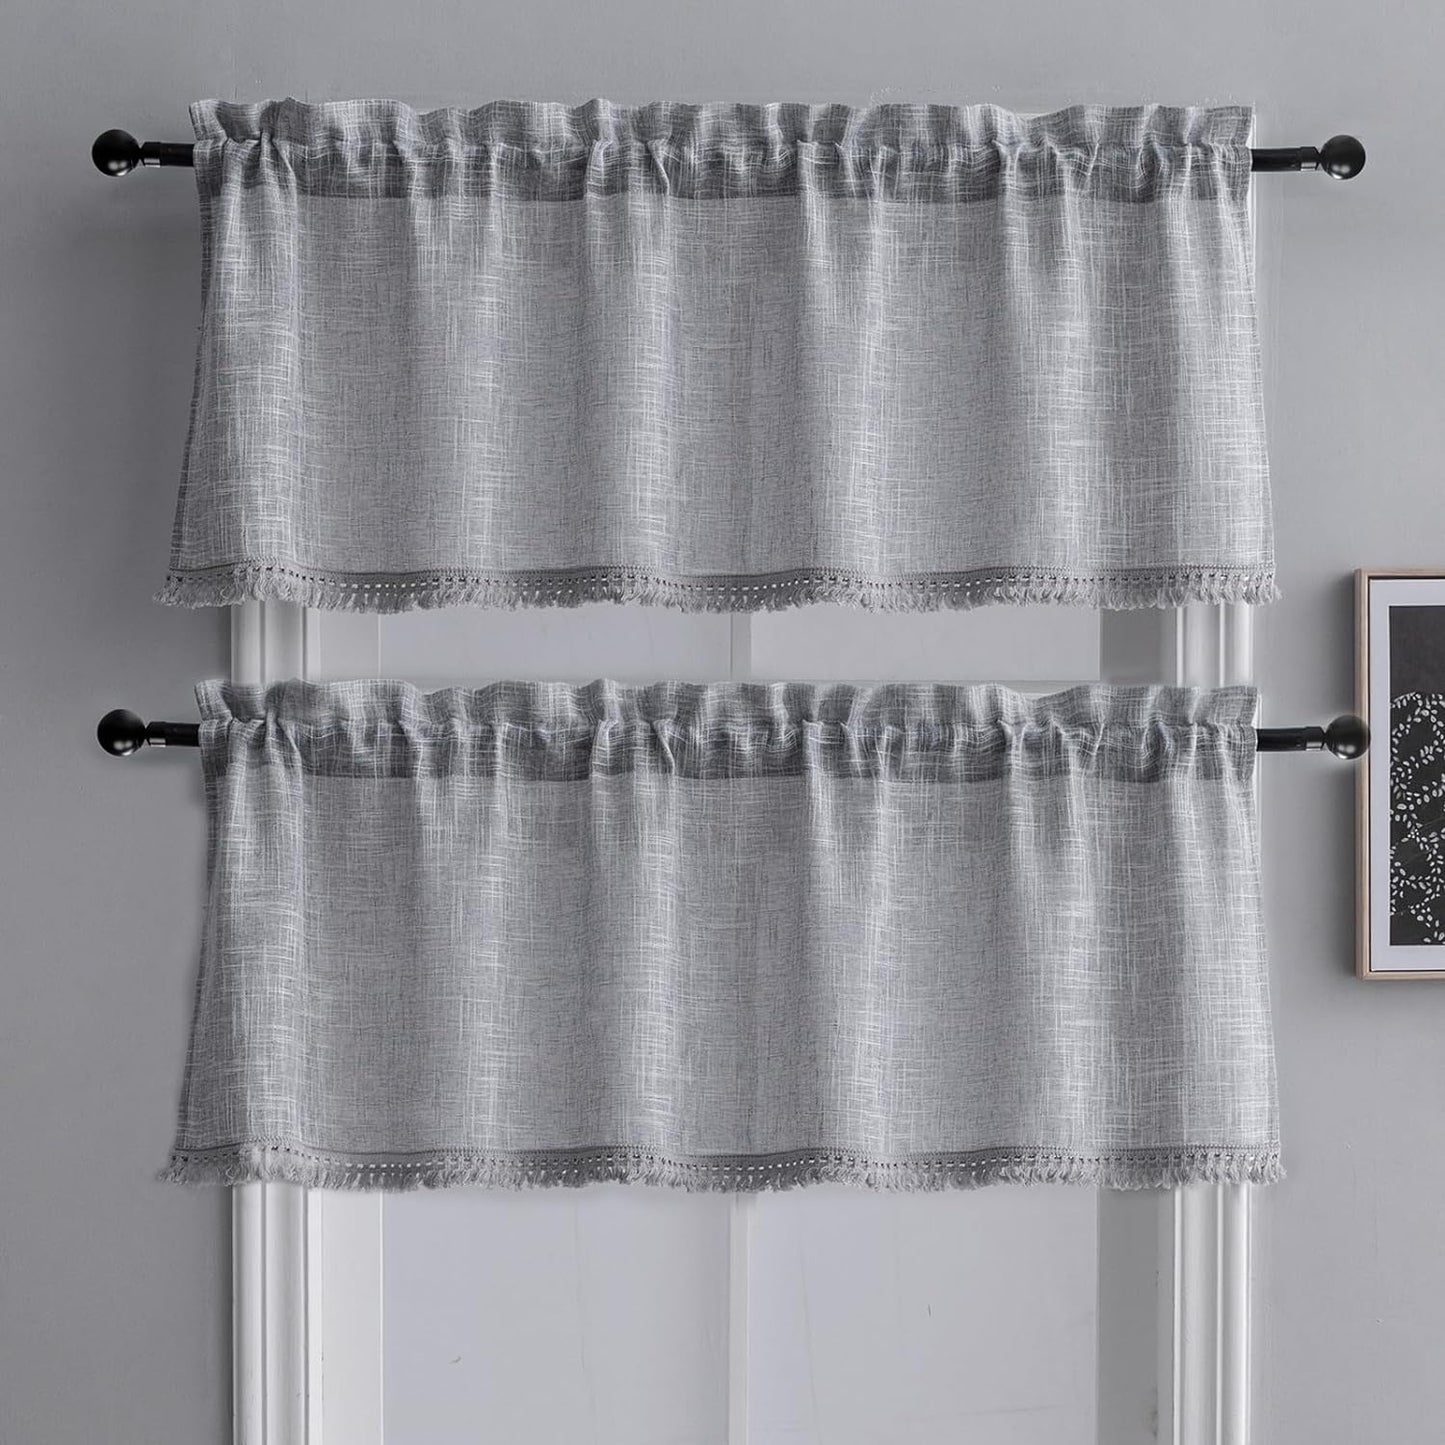 Beda Home Tassel Linen Textured Swag Curtain Valance for Farmhouses’ Kitchen; Light Filtering Rustic Short Swag Topper for Small Windows Bedroom Privacy Added Rod Pocket Design(Nature 36X63-2Pcs)  BD BEDA HOME Grey 52Wx18L - 2 Pcs 